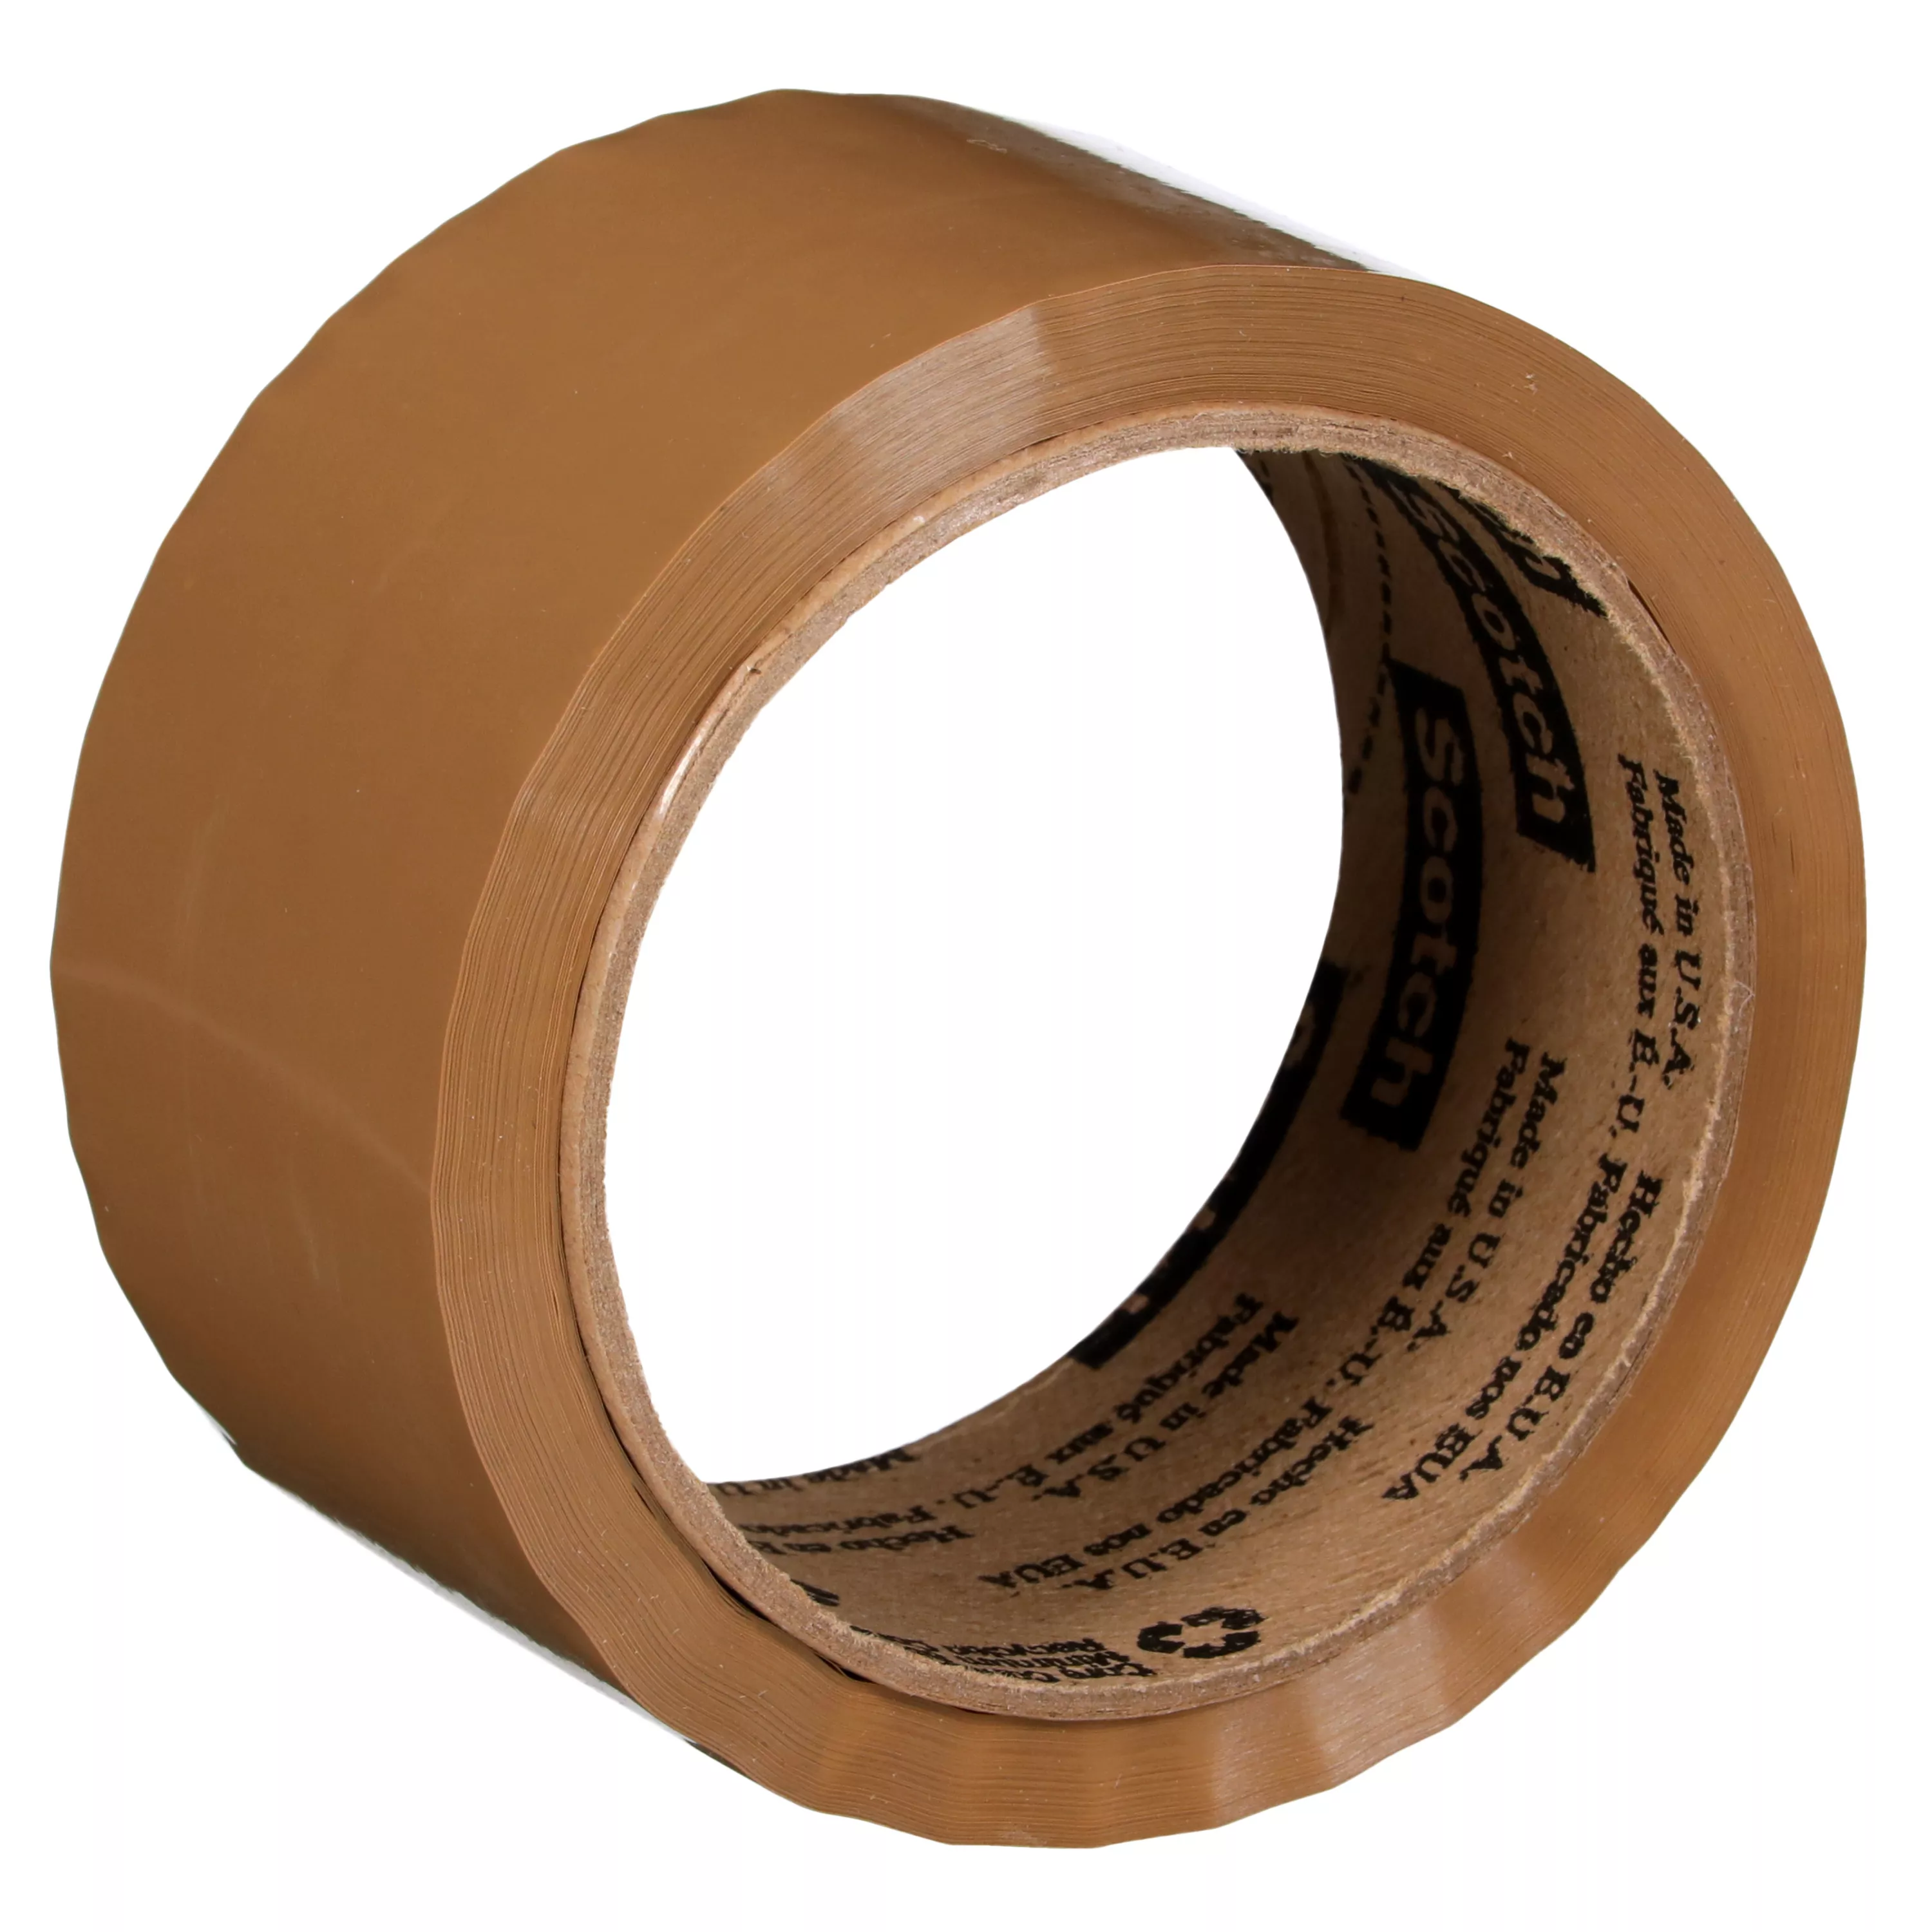 Scotch® Sealing Tape 371, Tan, 48 mm x 50 m, 36/Case, Conveniently
Packaged